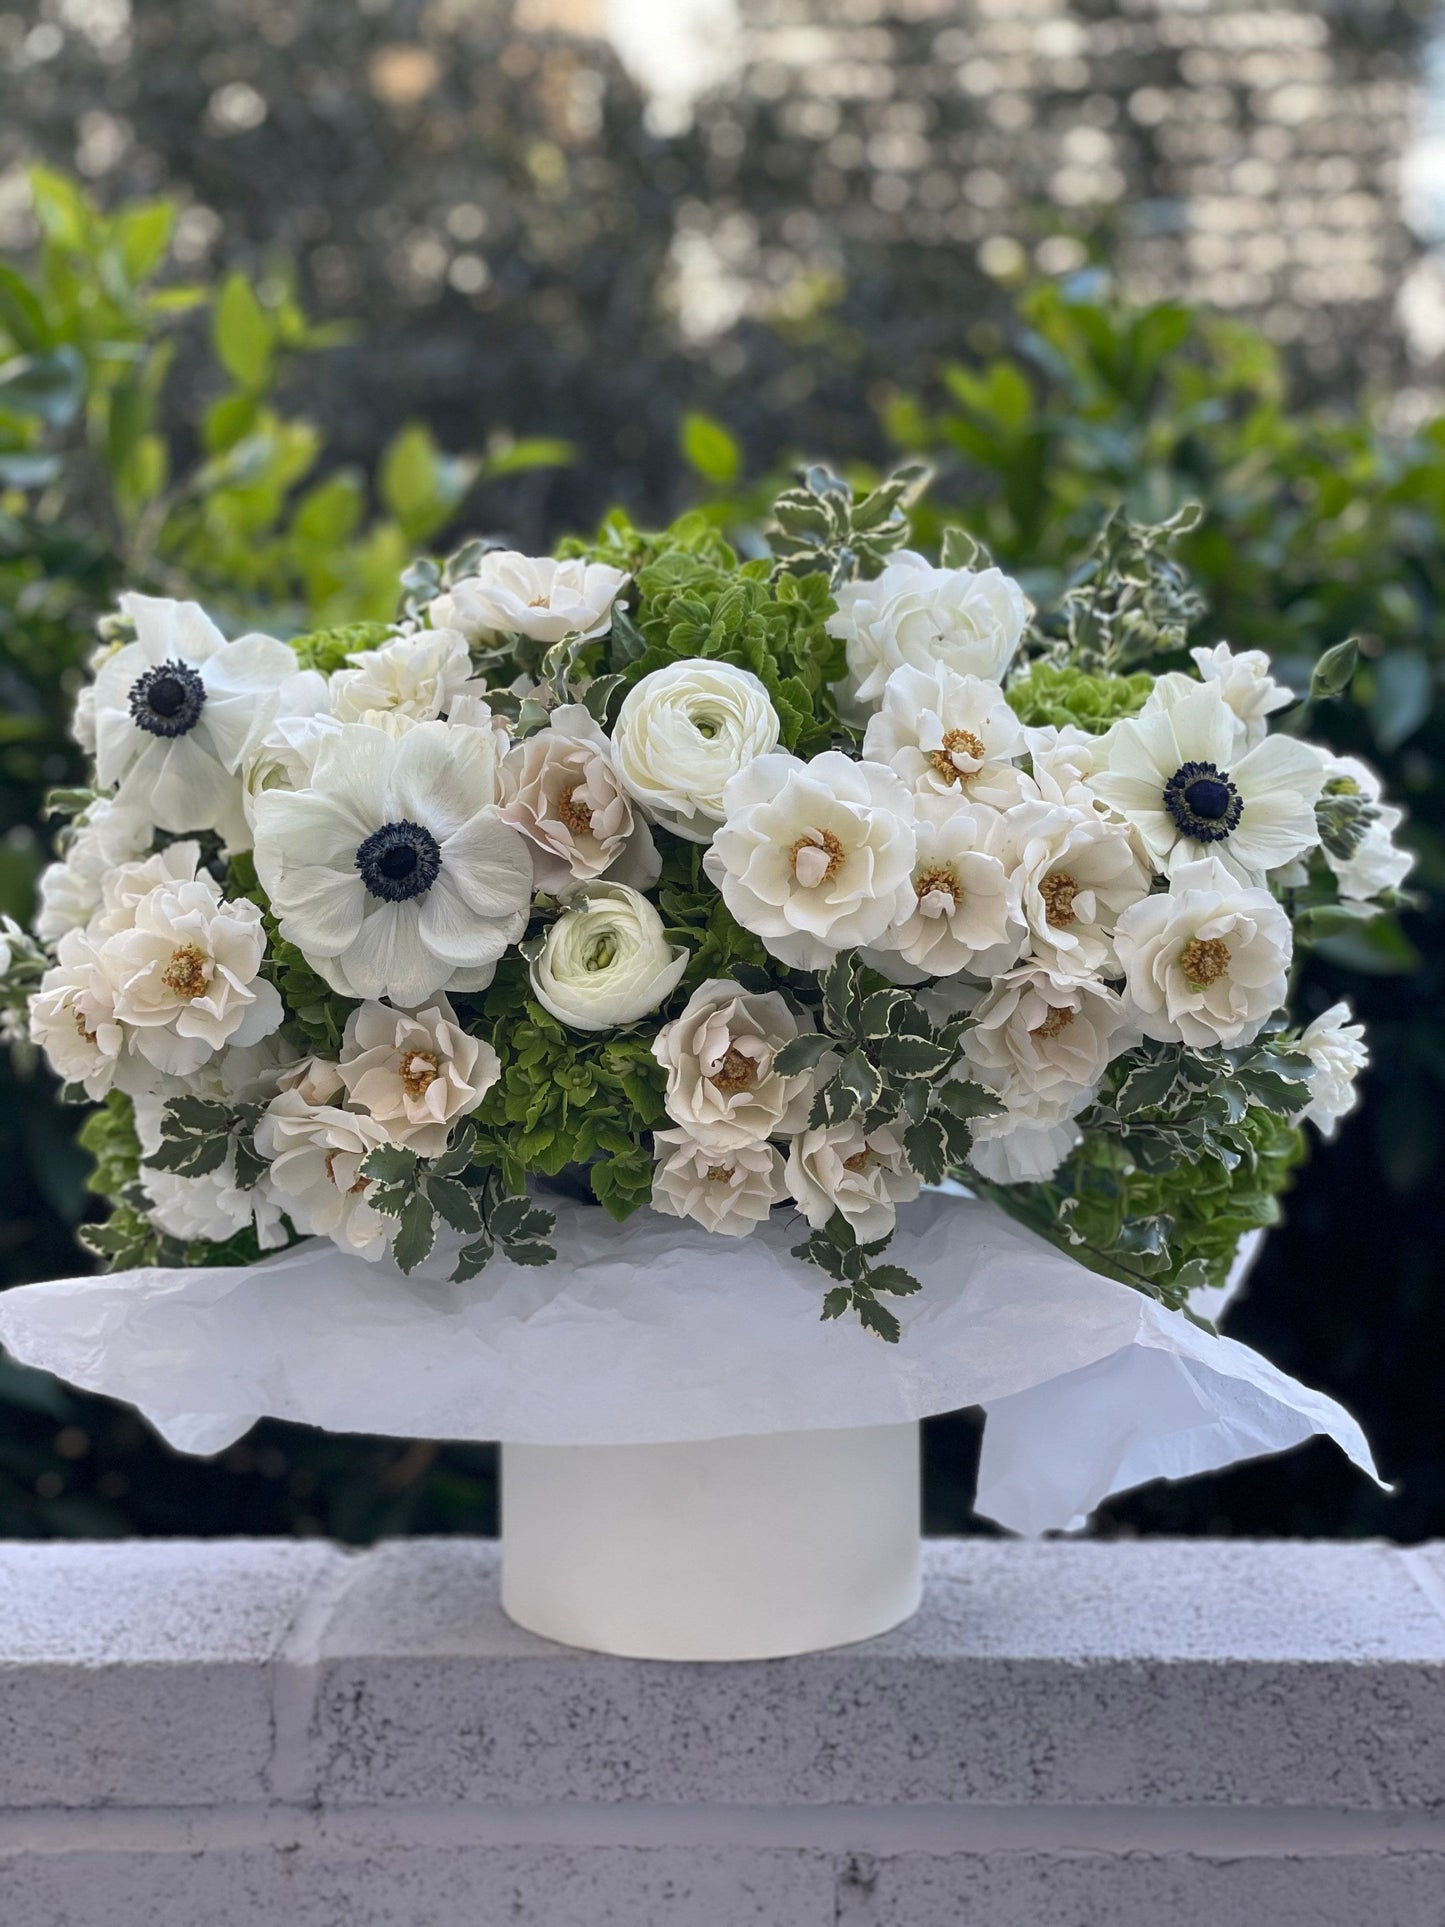 Box N.3 Green hydrangea with garden roses and amazing anemones